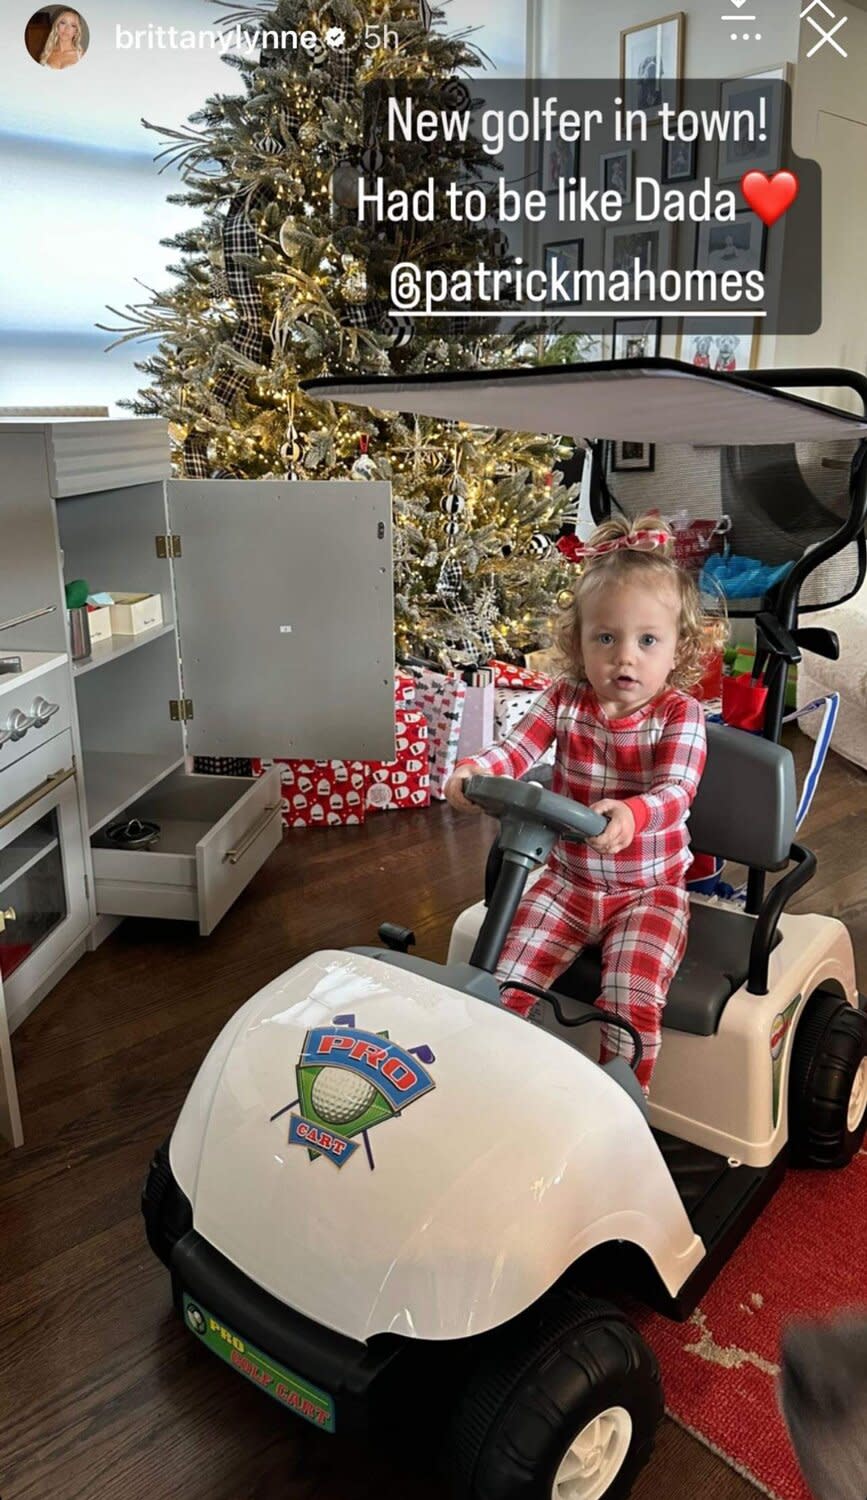 Brittany Mahomes Shares Daughter Sterling Exploring Her Toddler-Sized Golf Cart: 'Had to Be Like Dada'